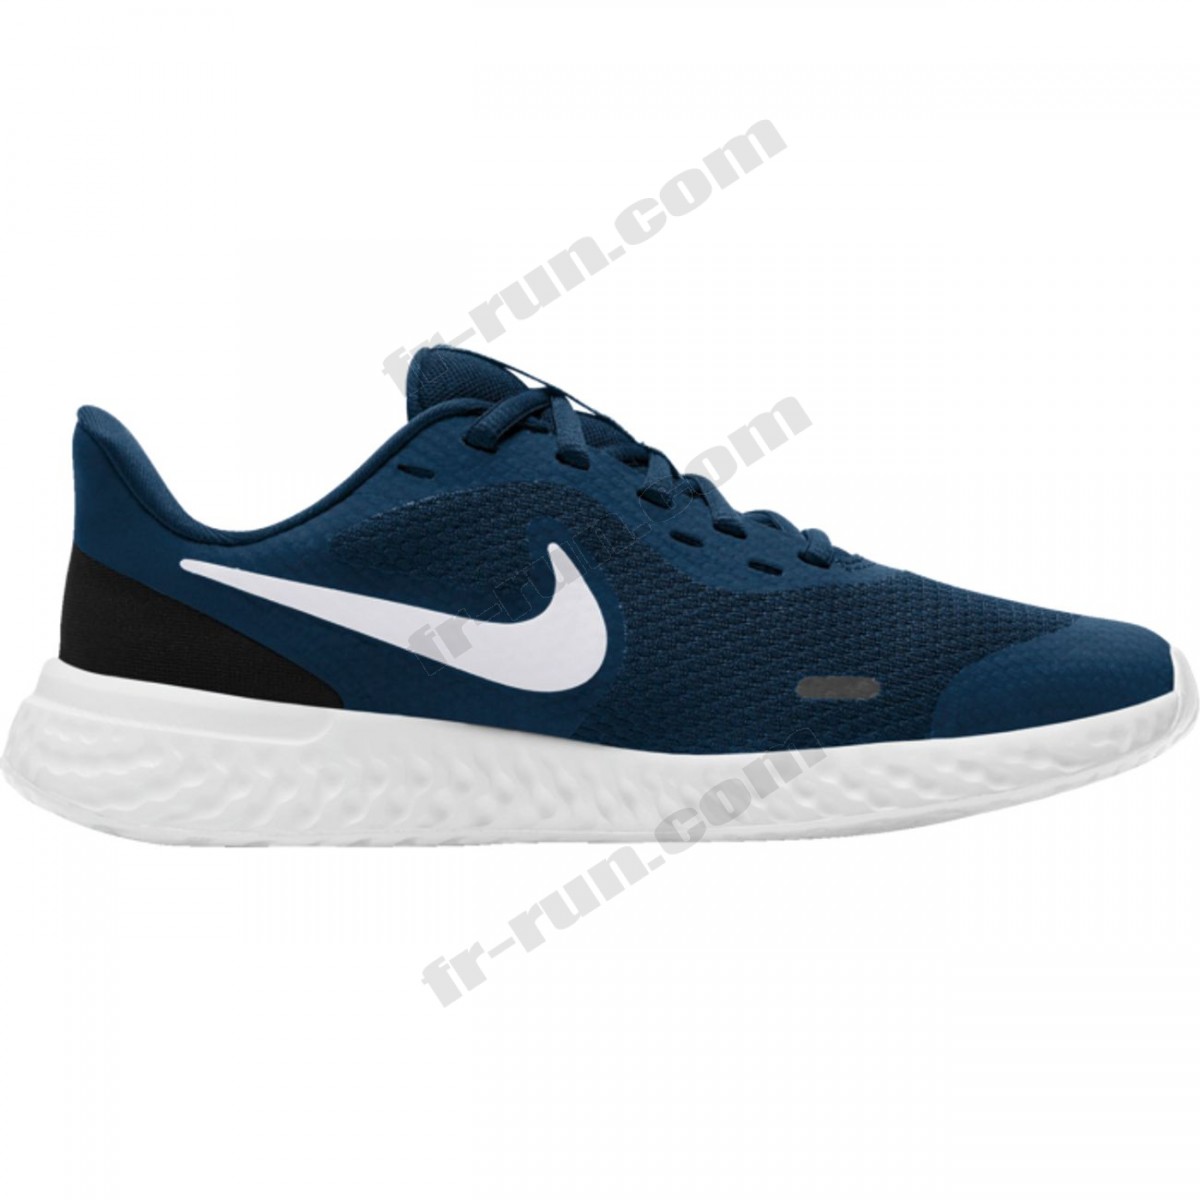 Nike/CHAUSSURES BASSES running enfant NIKE REVOLUTION 5 √ Nouveau style √ Soldes - Nike/CHAUSSURES BASSES running enfant NIKE REVOLUTION 5 √ Nouveau style √ Soldes